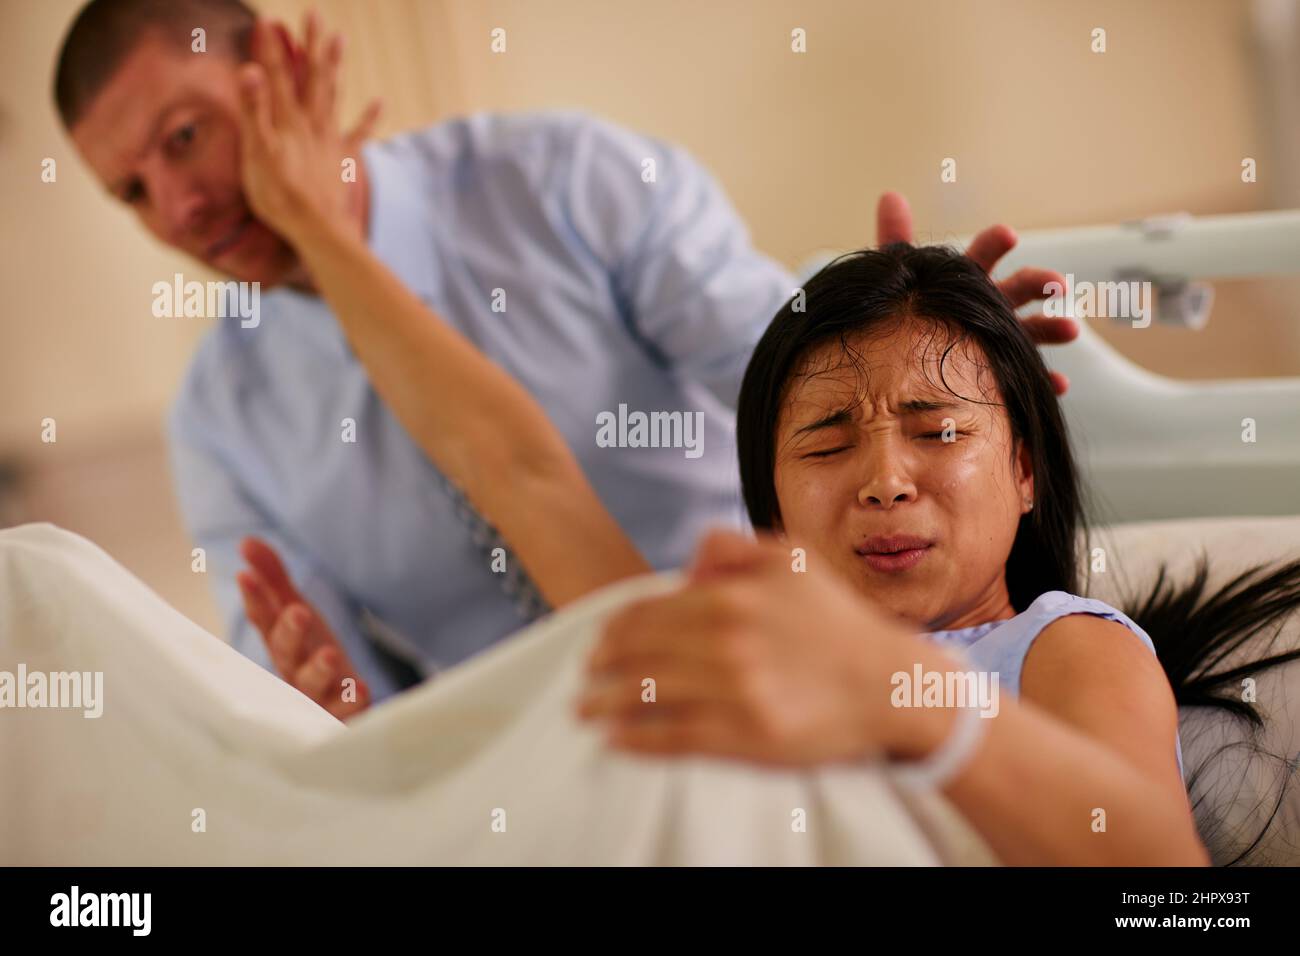 Youre not helping.... Shot of a young woman giving birth with her husband supporting her in the background. Stock Photo